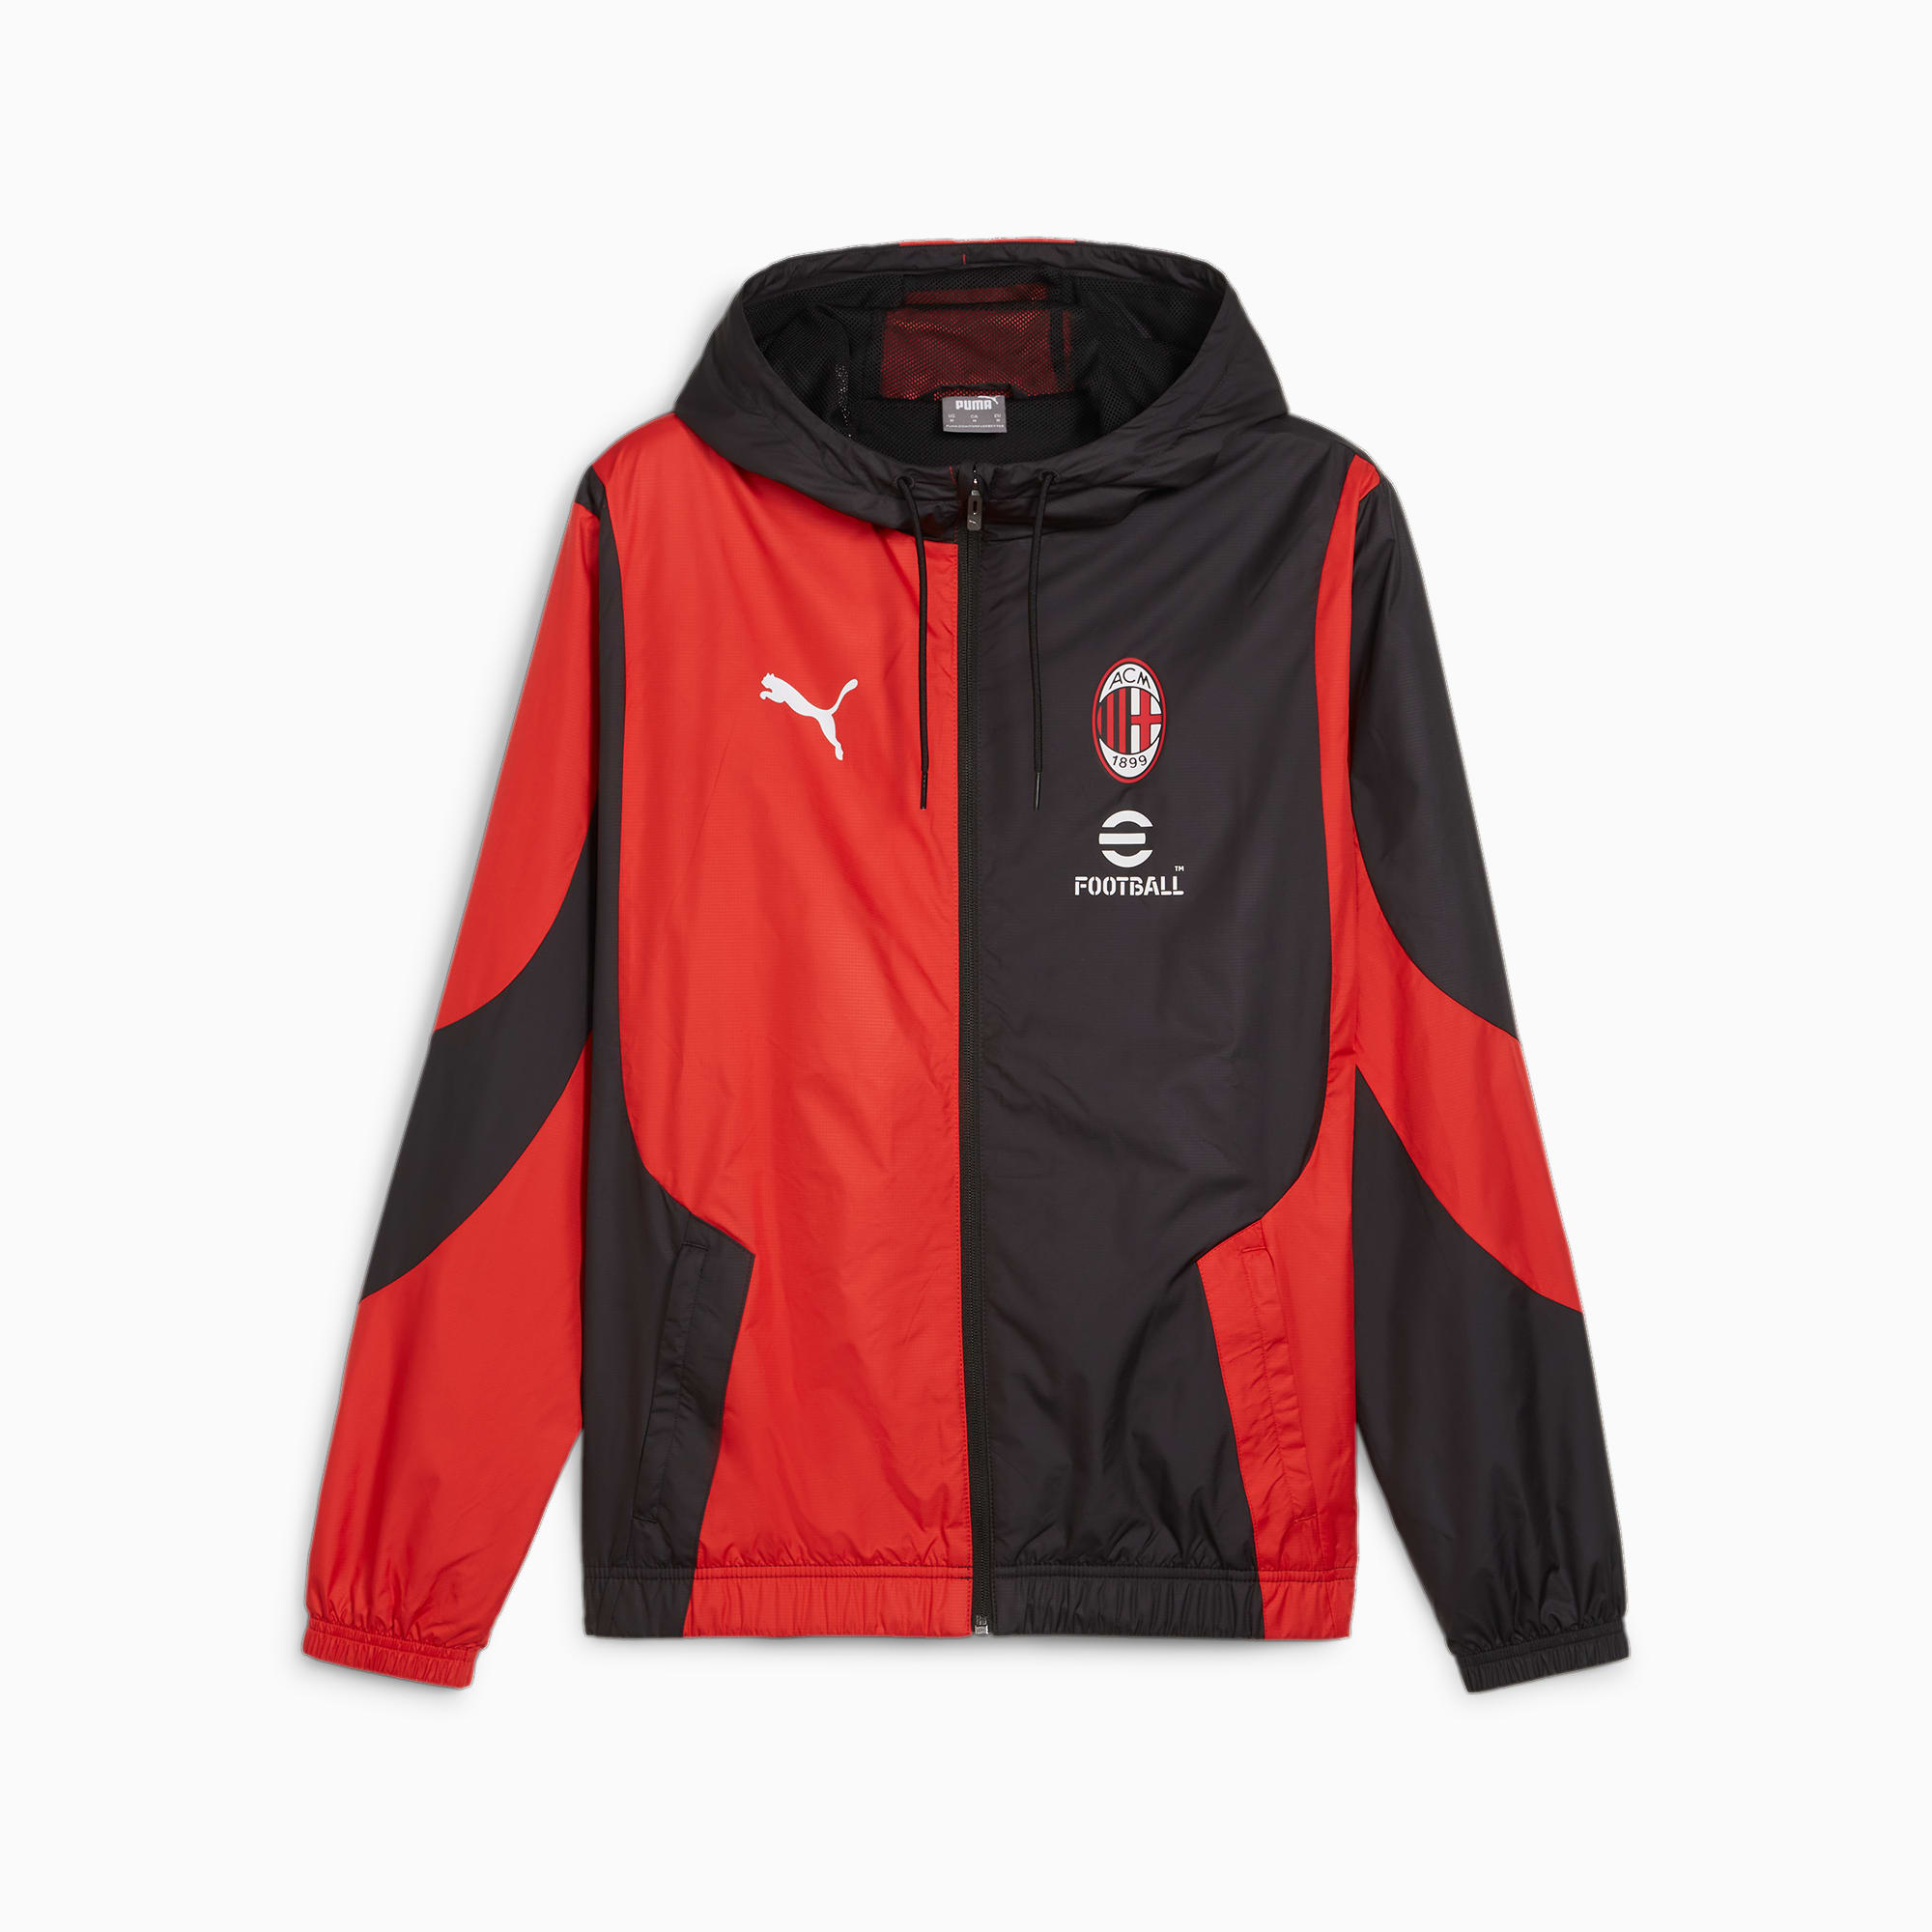 Men's PUMA AC Milan Pre-Match Jacket, Black/For All Time Red, Size XL, Clothing